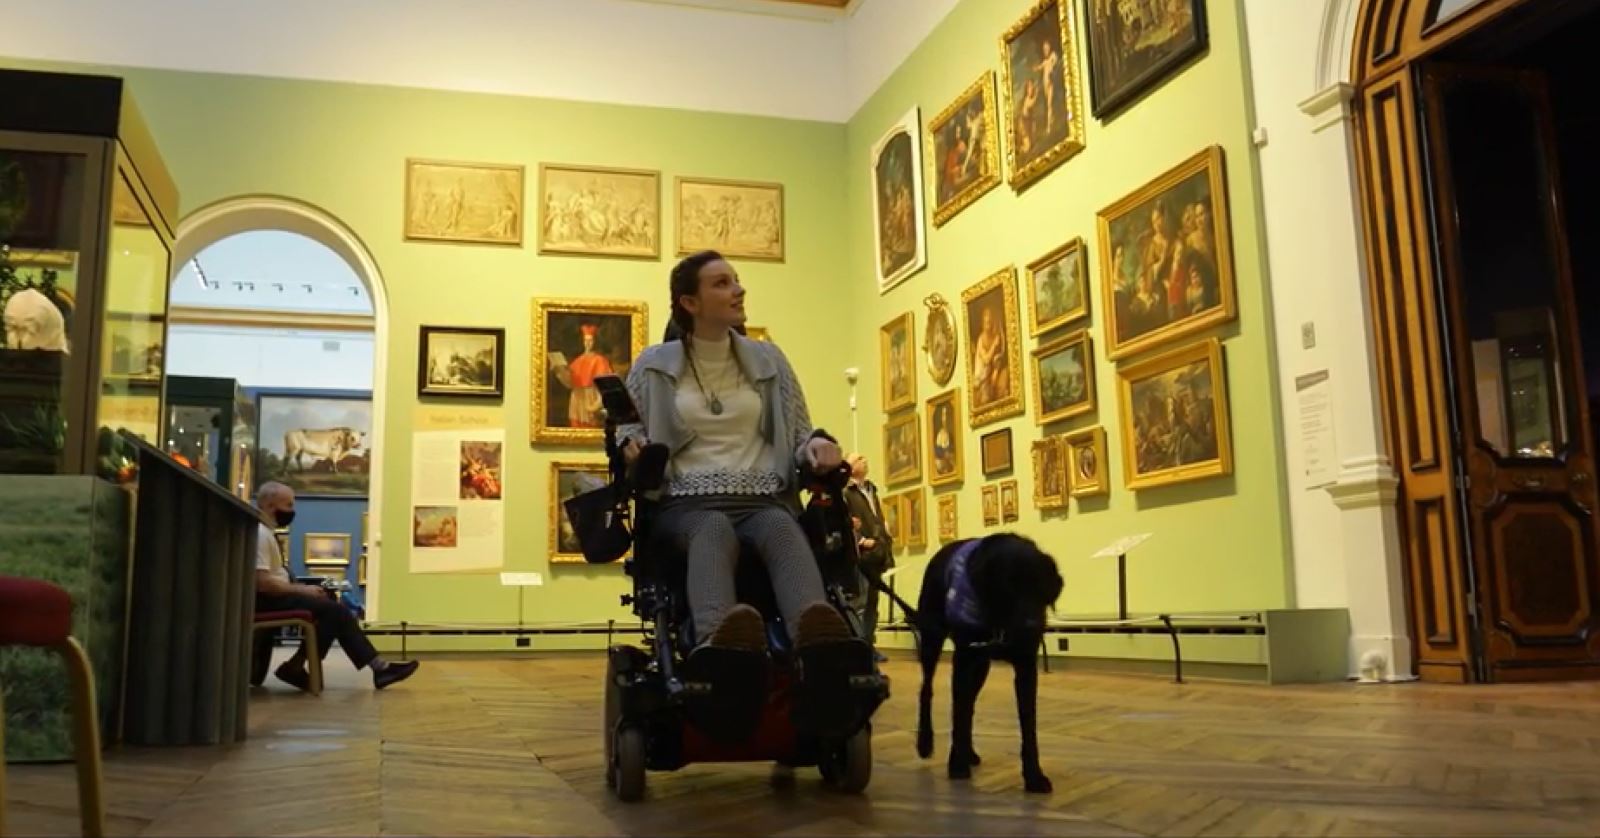 girl in wheelchair in gallery at Bowes Museum